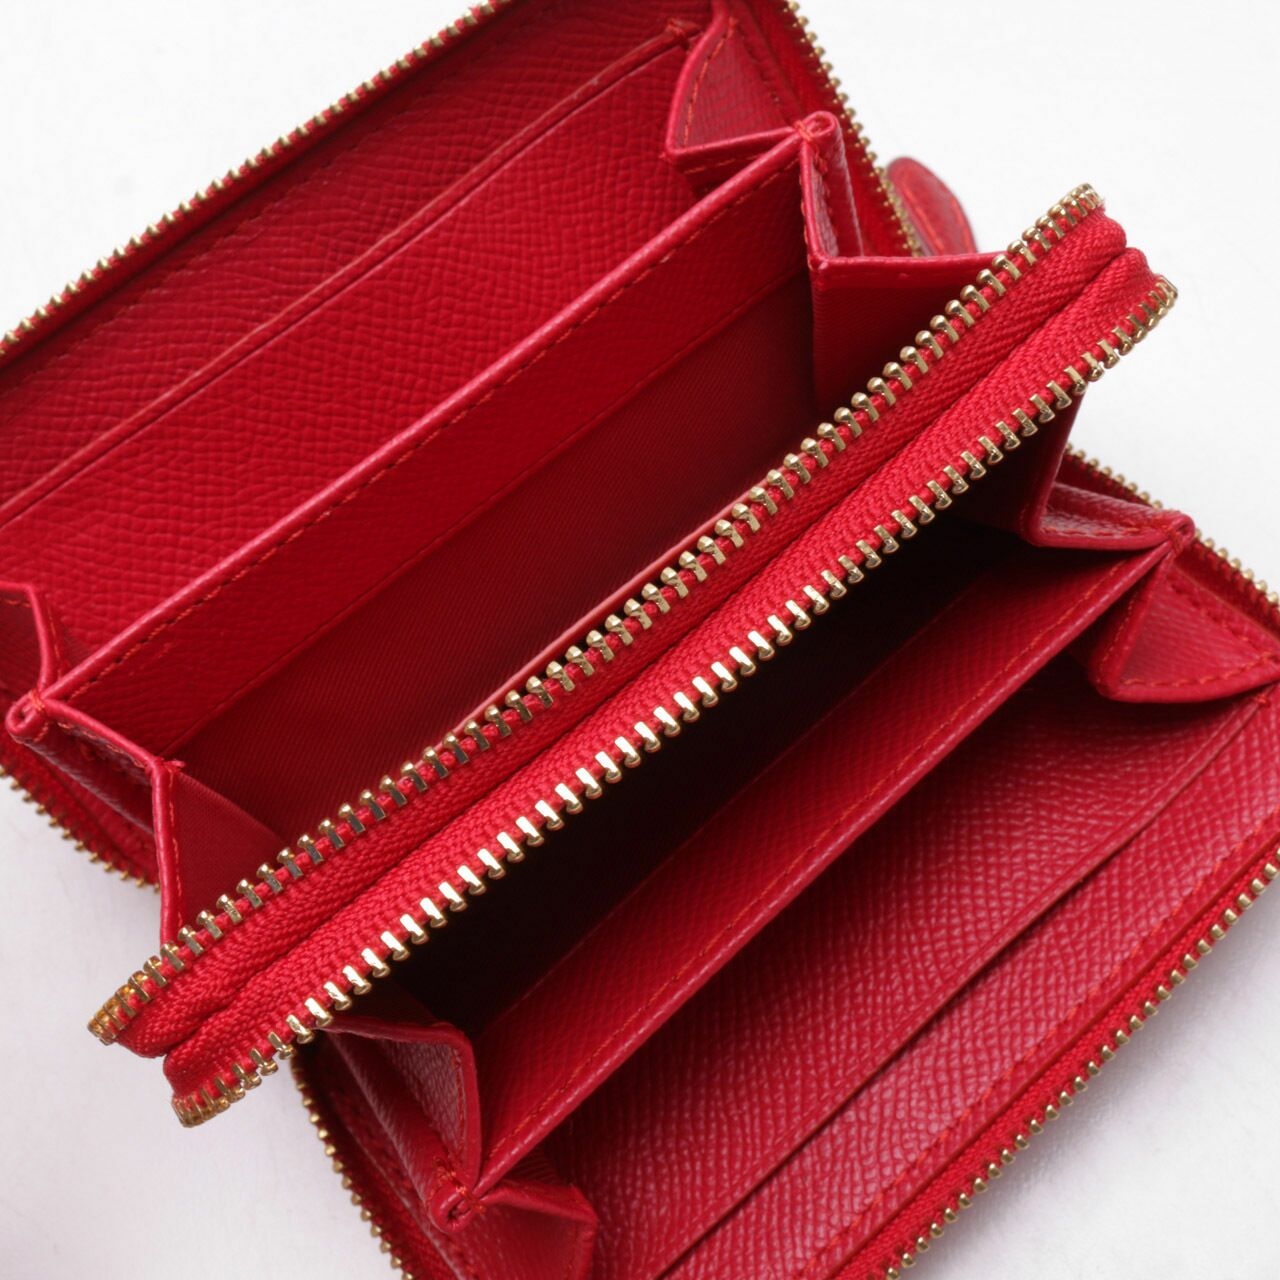 Coach Red Small Double Zip Wallet